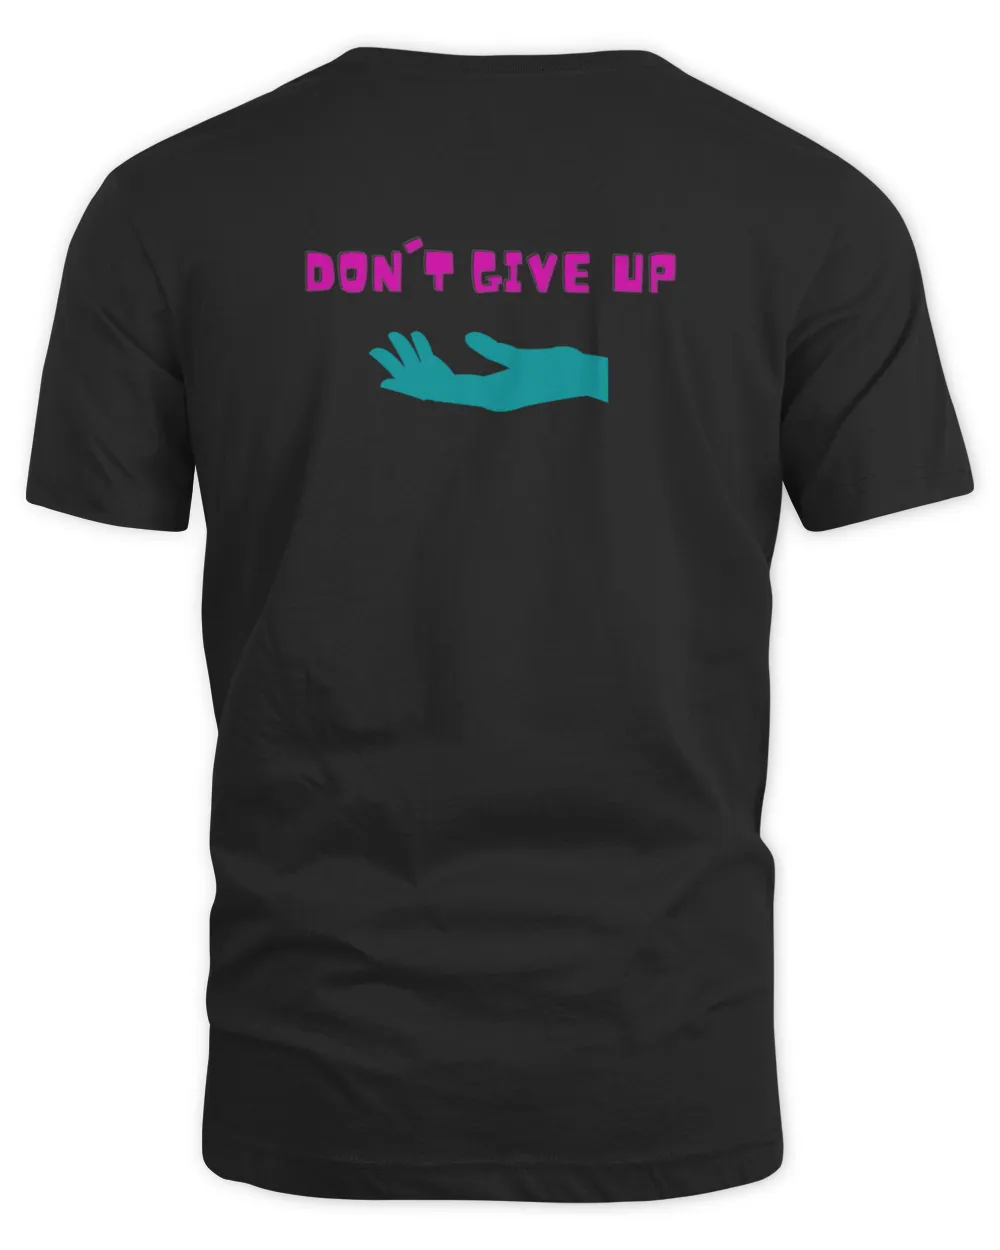 don't give up (friends, family, love)